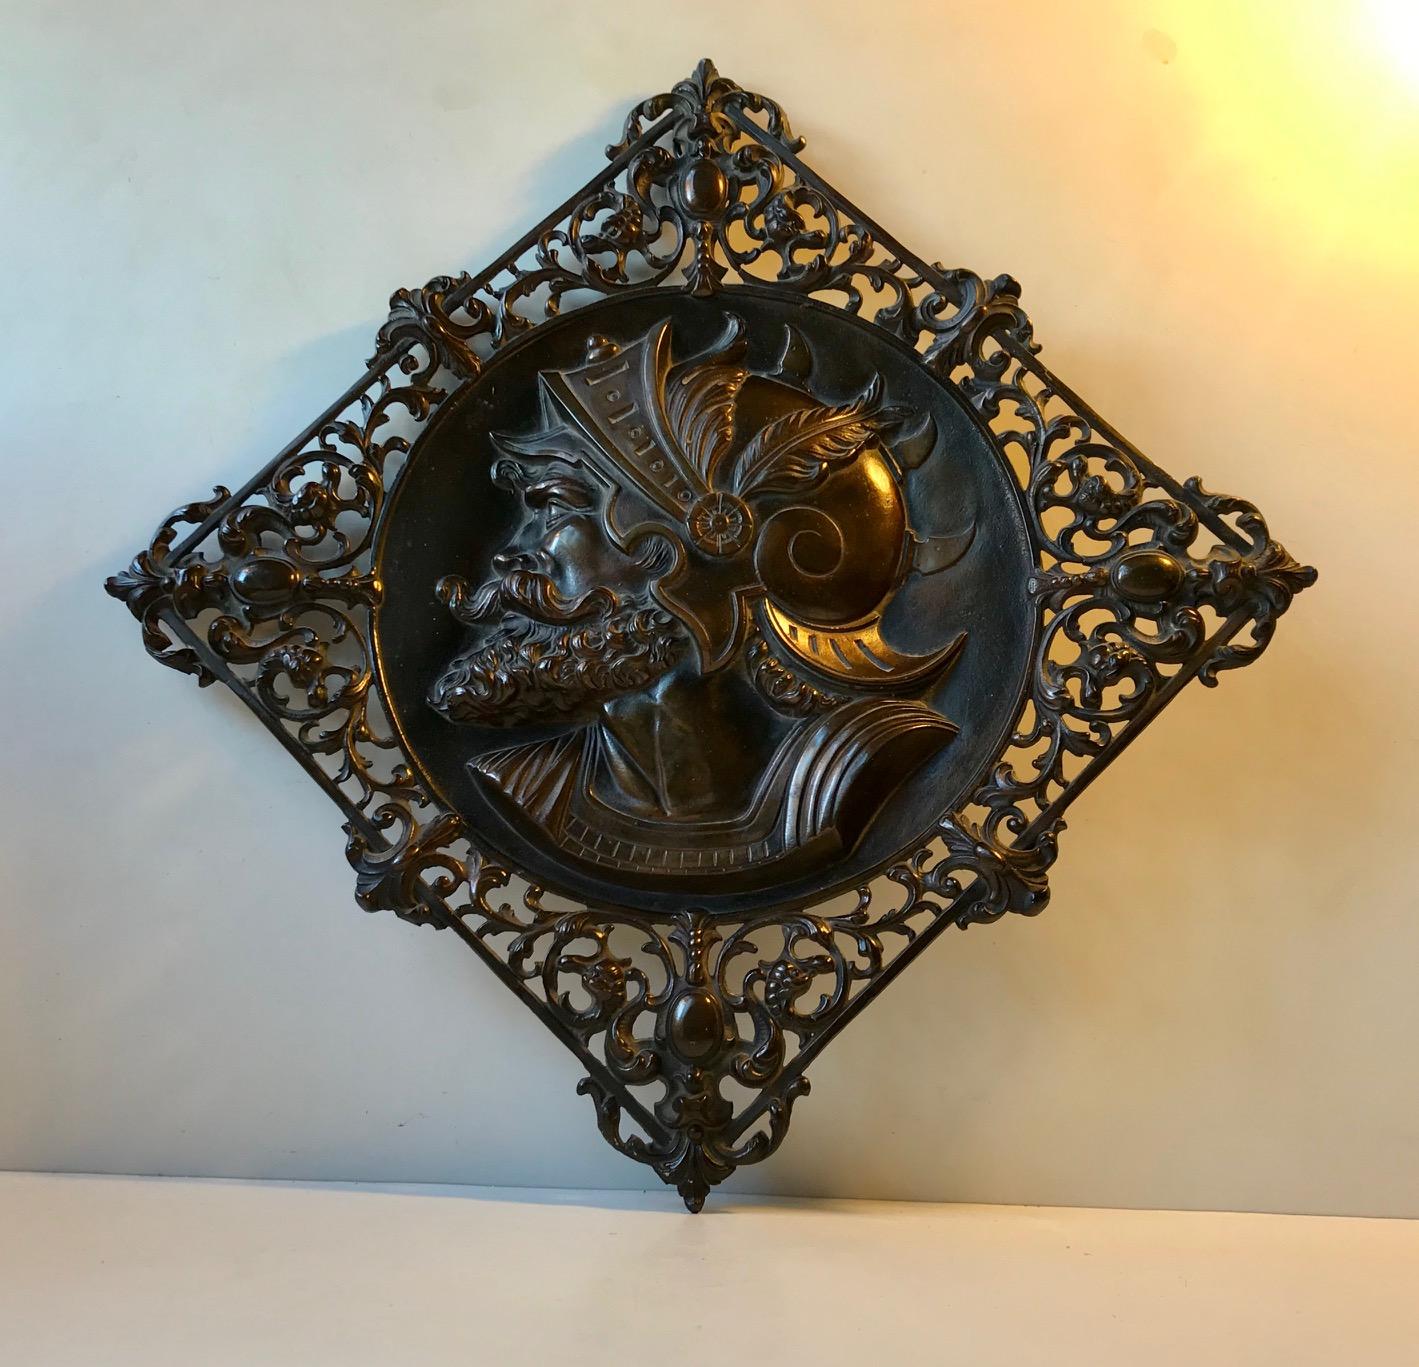 Whether this bronze wall plaque depicts a Roman Gladiator or Legionaire is uncertain. It was brought home from Rome in 1970 or 71. It is made from solid bronze that has a rich brown patina. The detailed ornamentation is partially perforated. It has